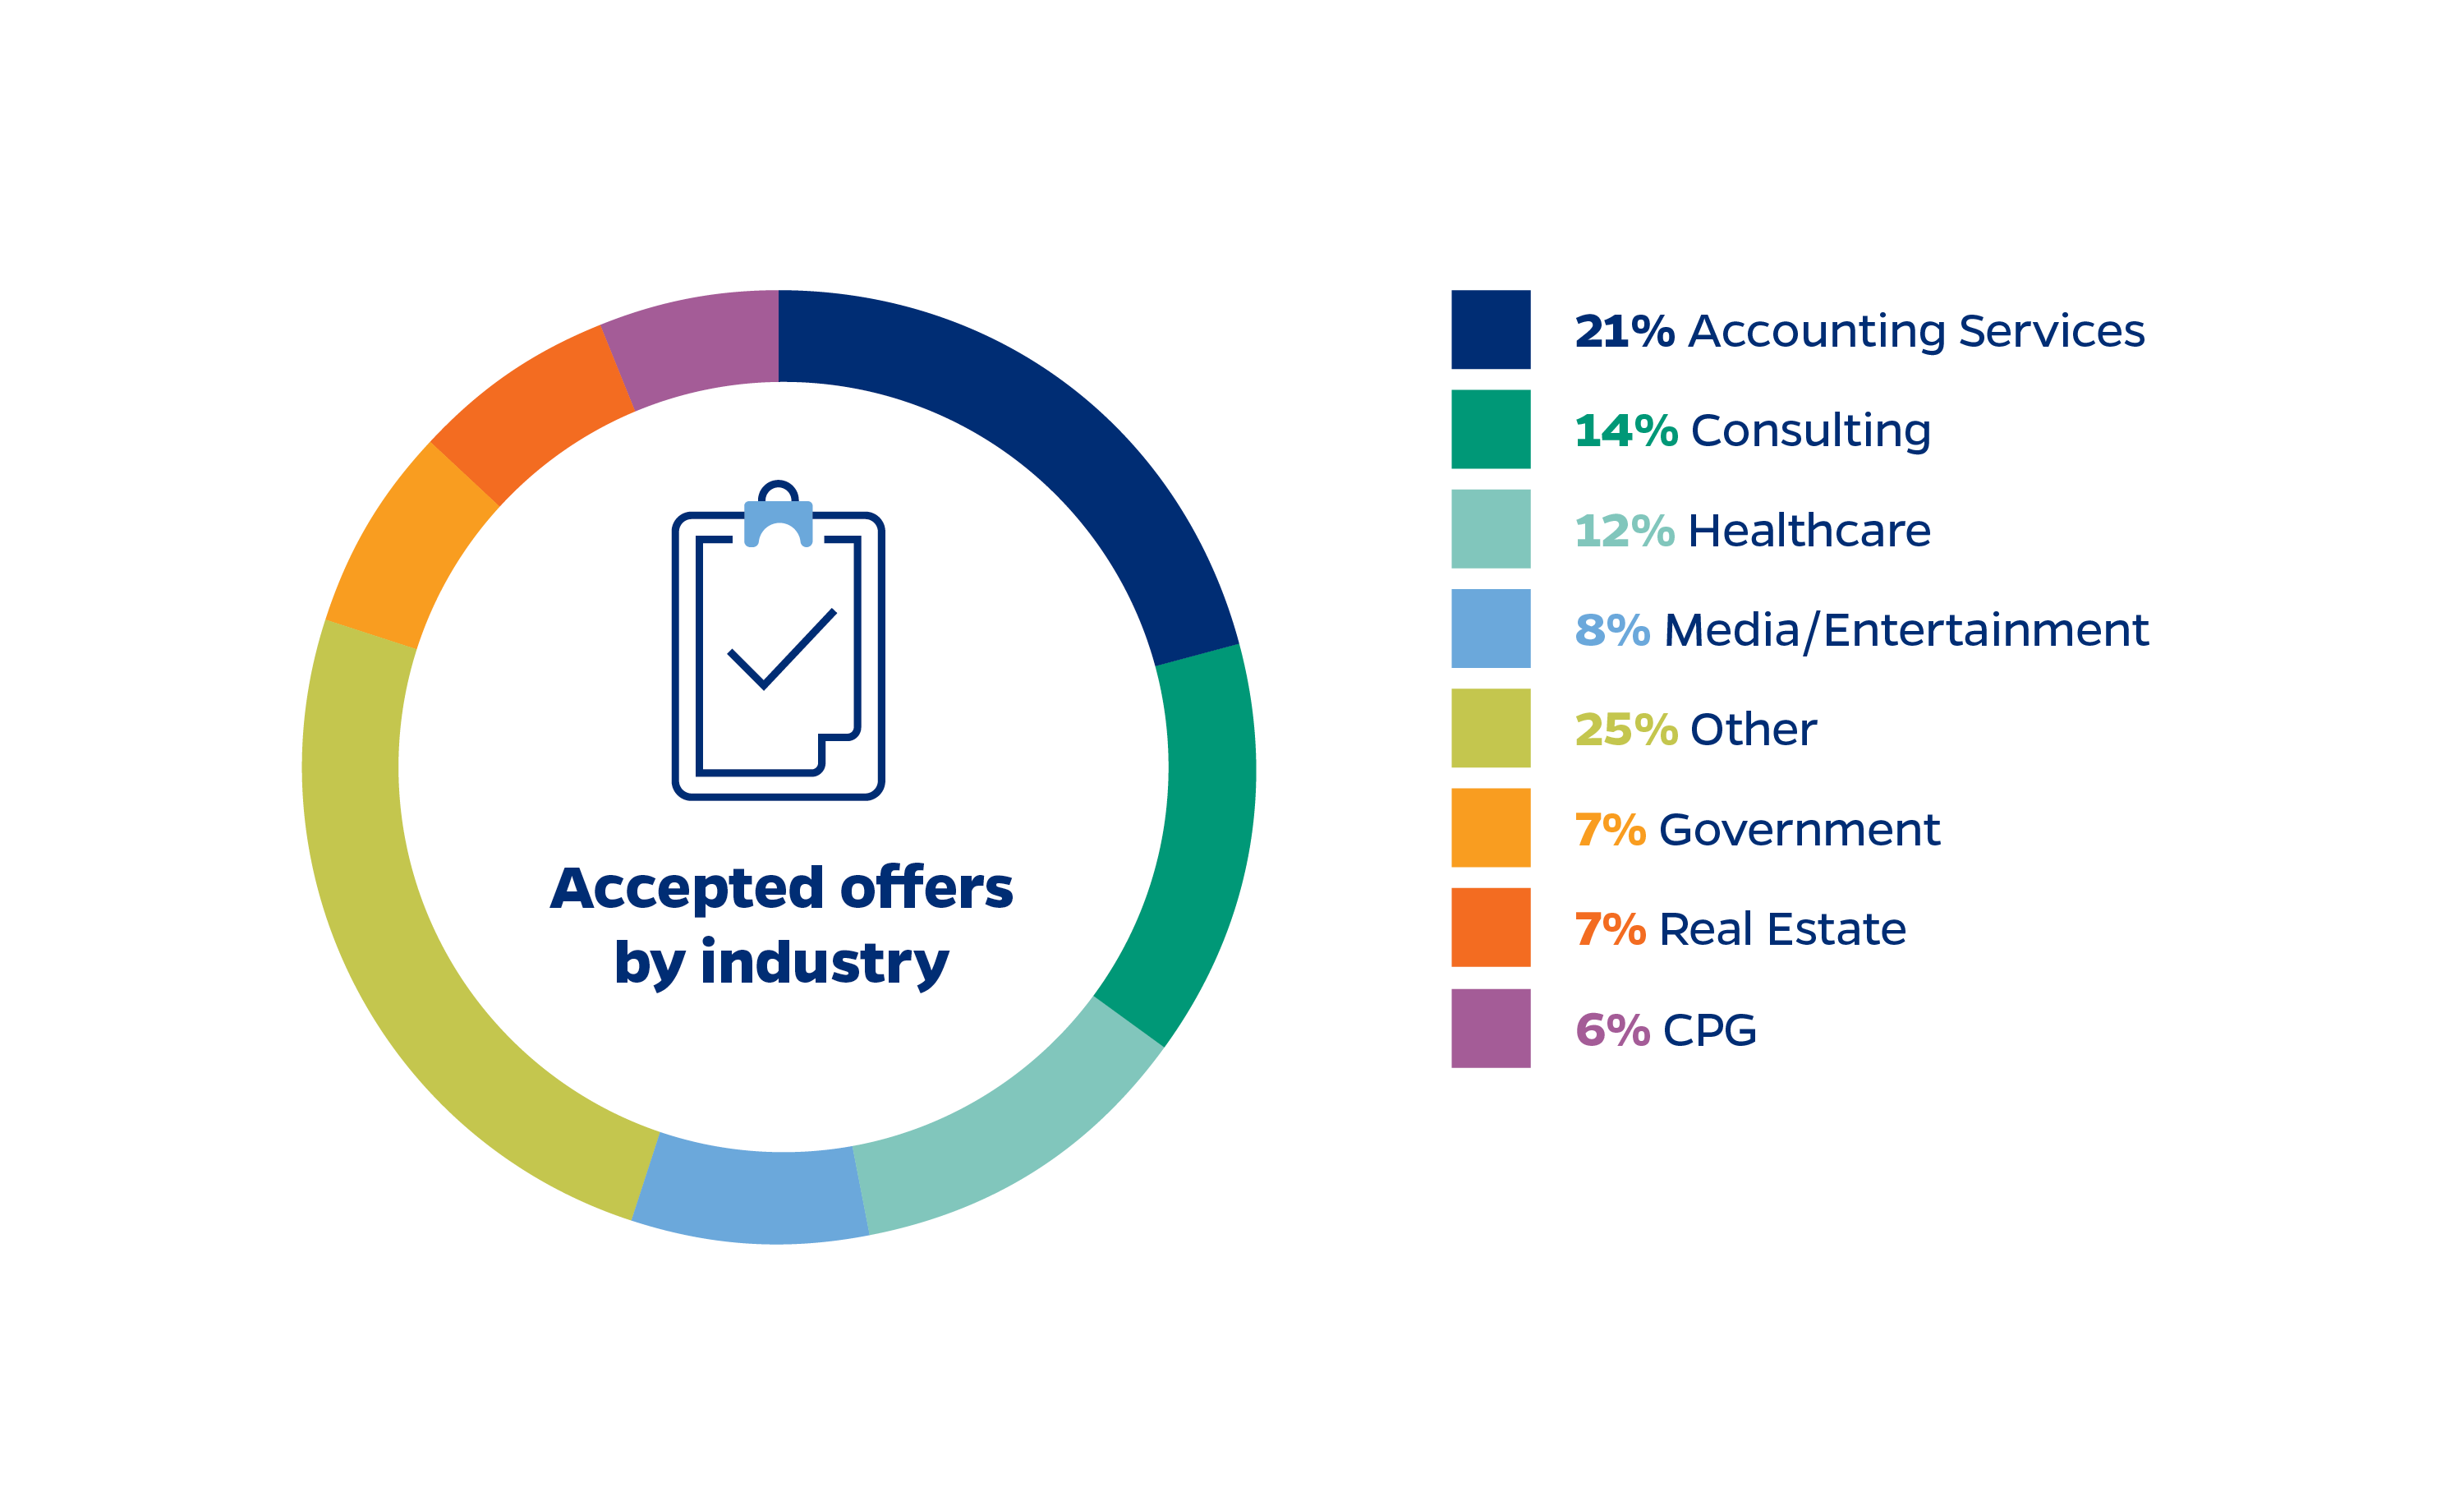 accepted offers by industry 21% accounting services; 14% consulting; 12% healthcare; 8% media/entertainment; 25% other; 7% government; 7% real estate; 6% CPG